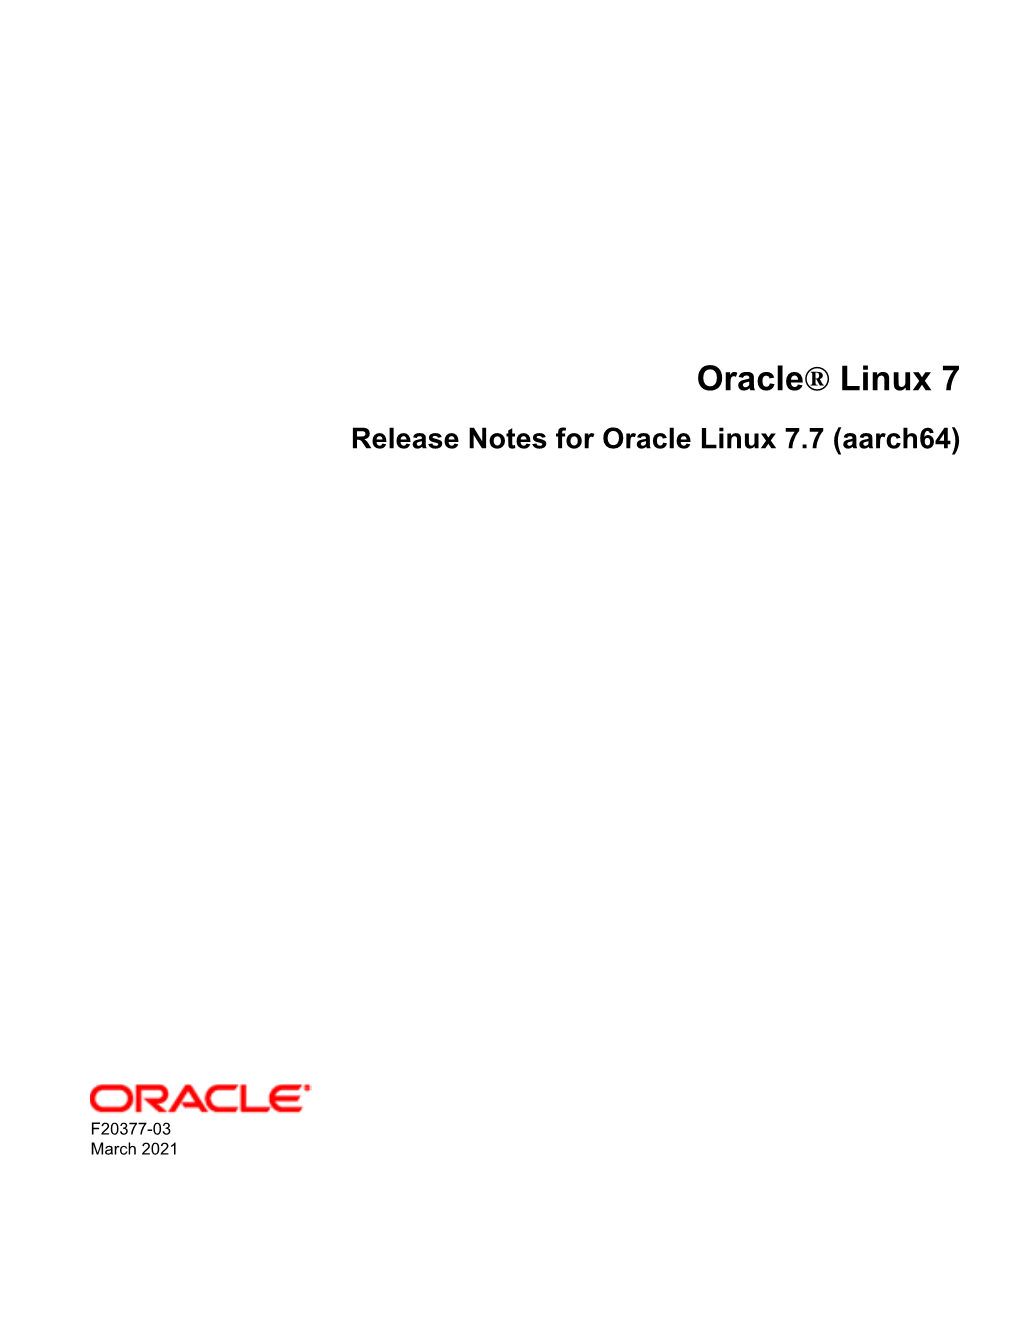 Oracle® Linux 7 Release Notes for Oracle Linux 7.7 (Aarch64)